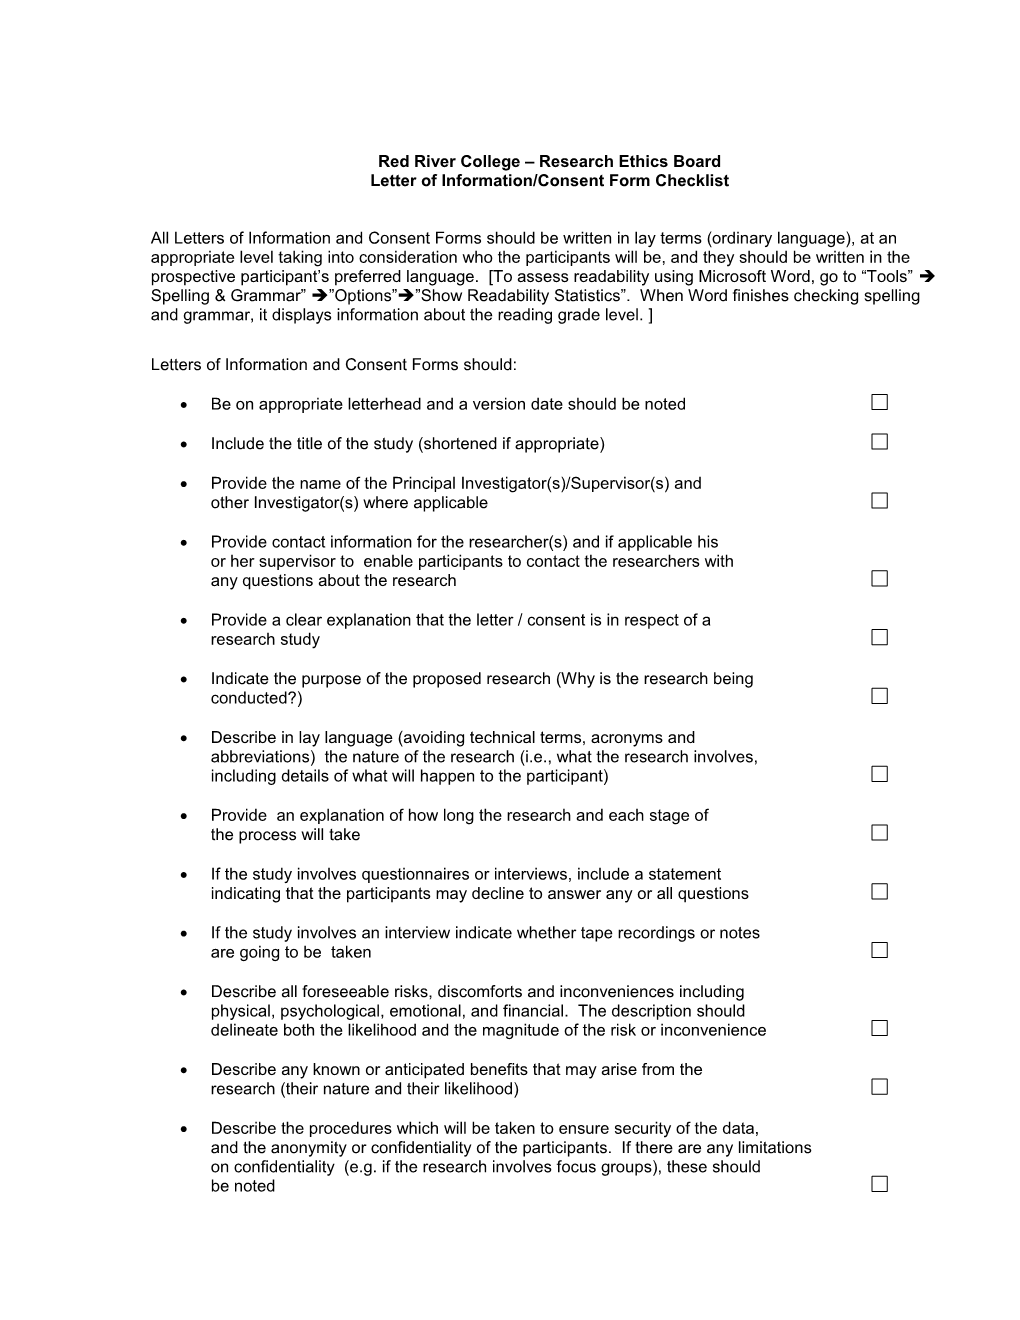 Letter of Information/Consent Form Checklist